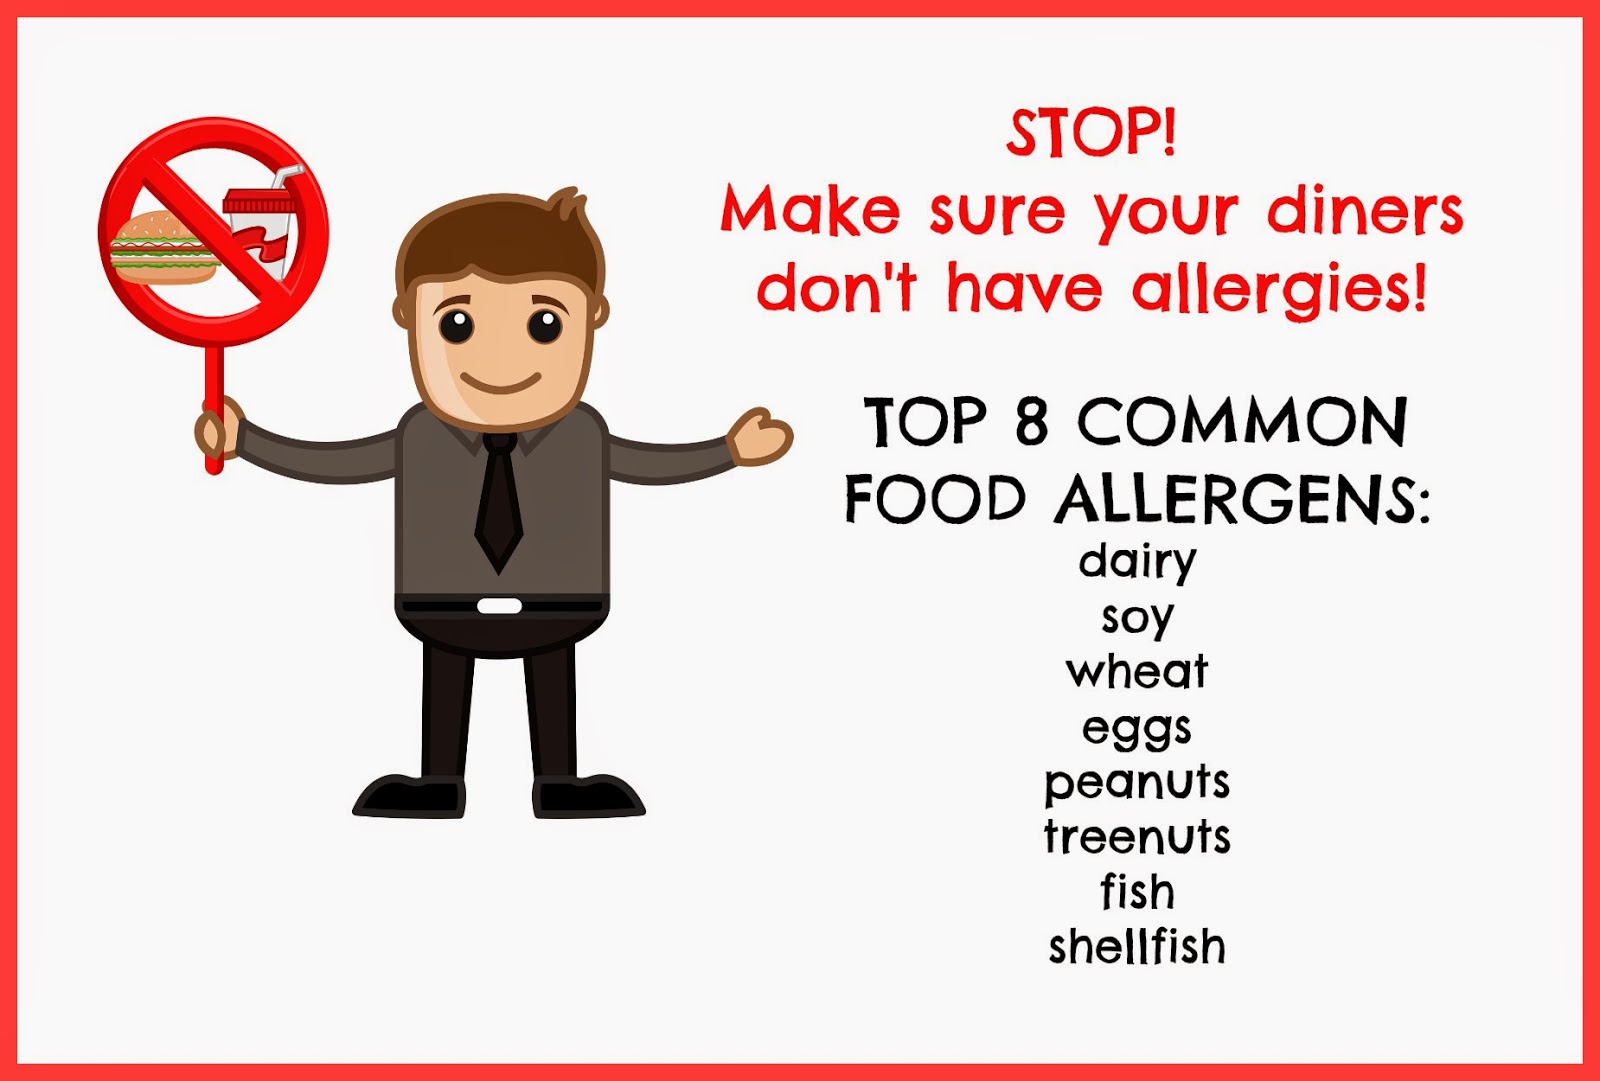 STOP: CHECK TO MAKE SURE YOUR DINNER GUESTS AREN'T ALLERGIC TO THEIR MEAL!